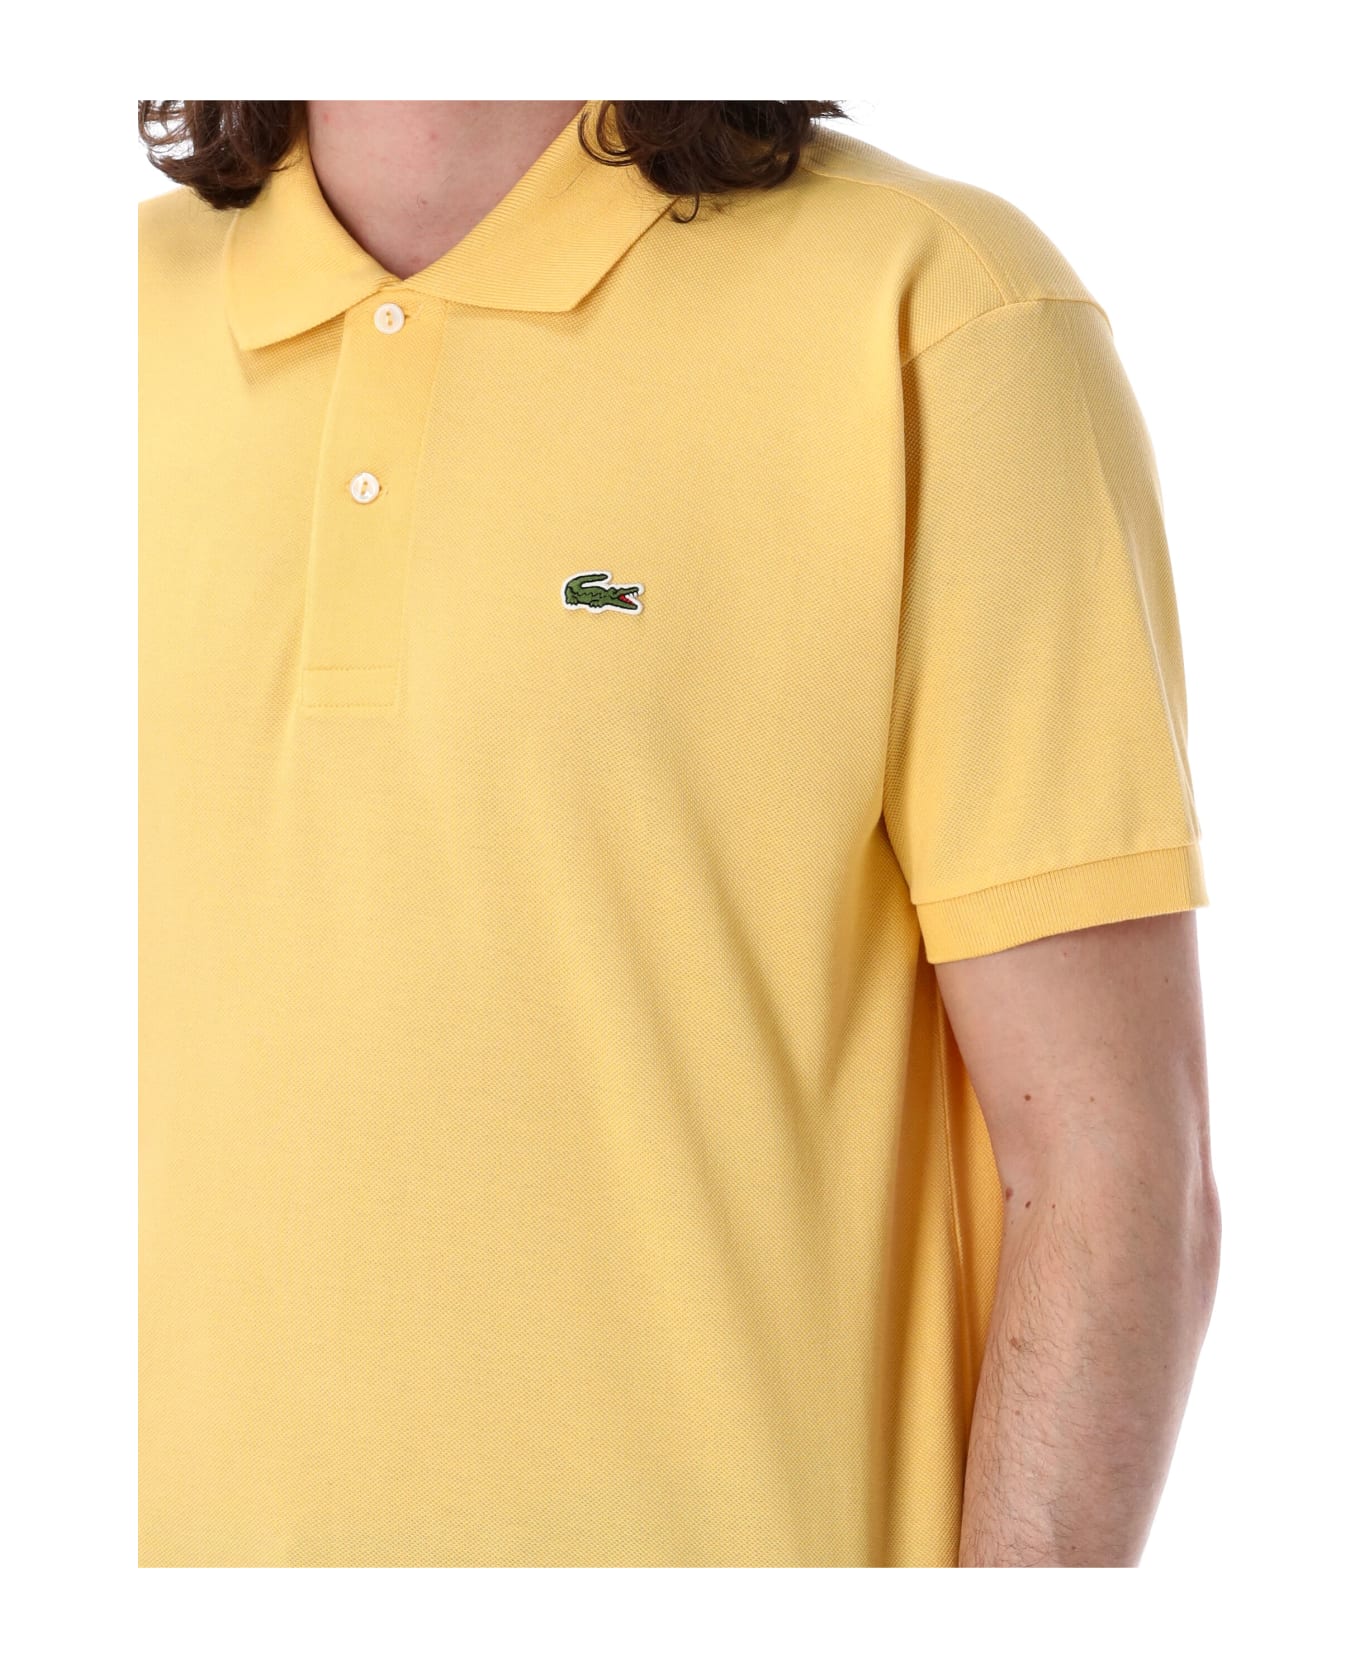 Lacoste Classic Fit Polo Shirt - YELLOW